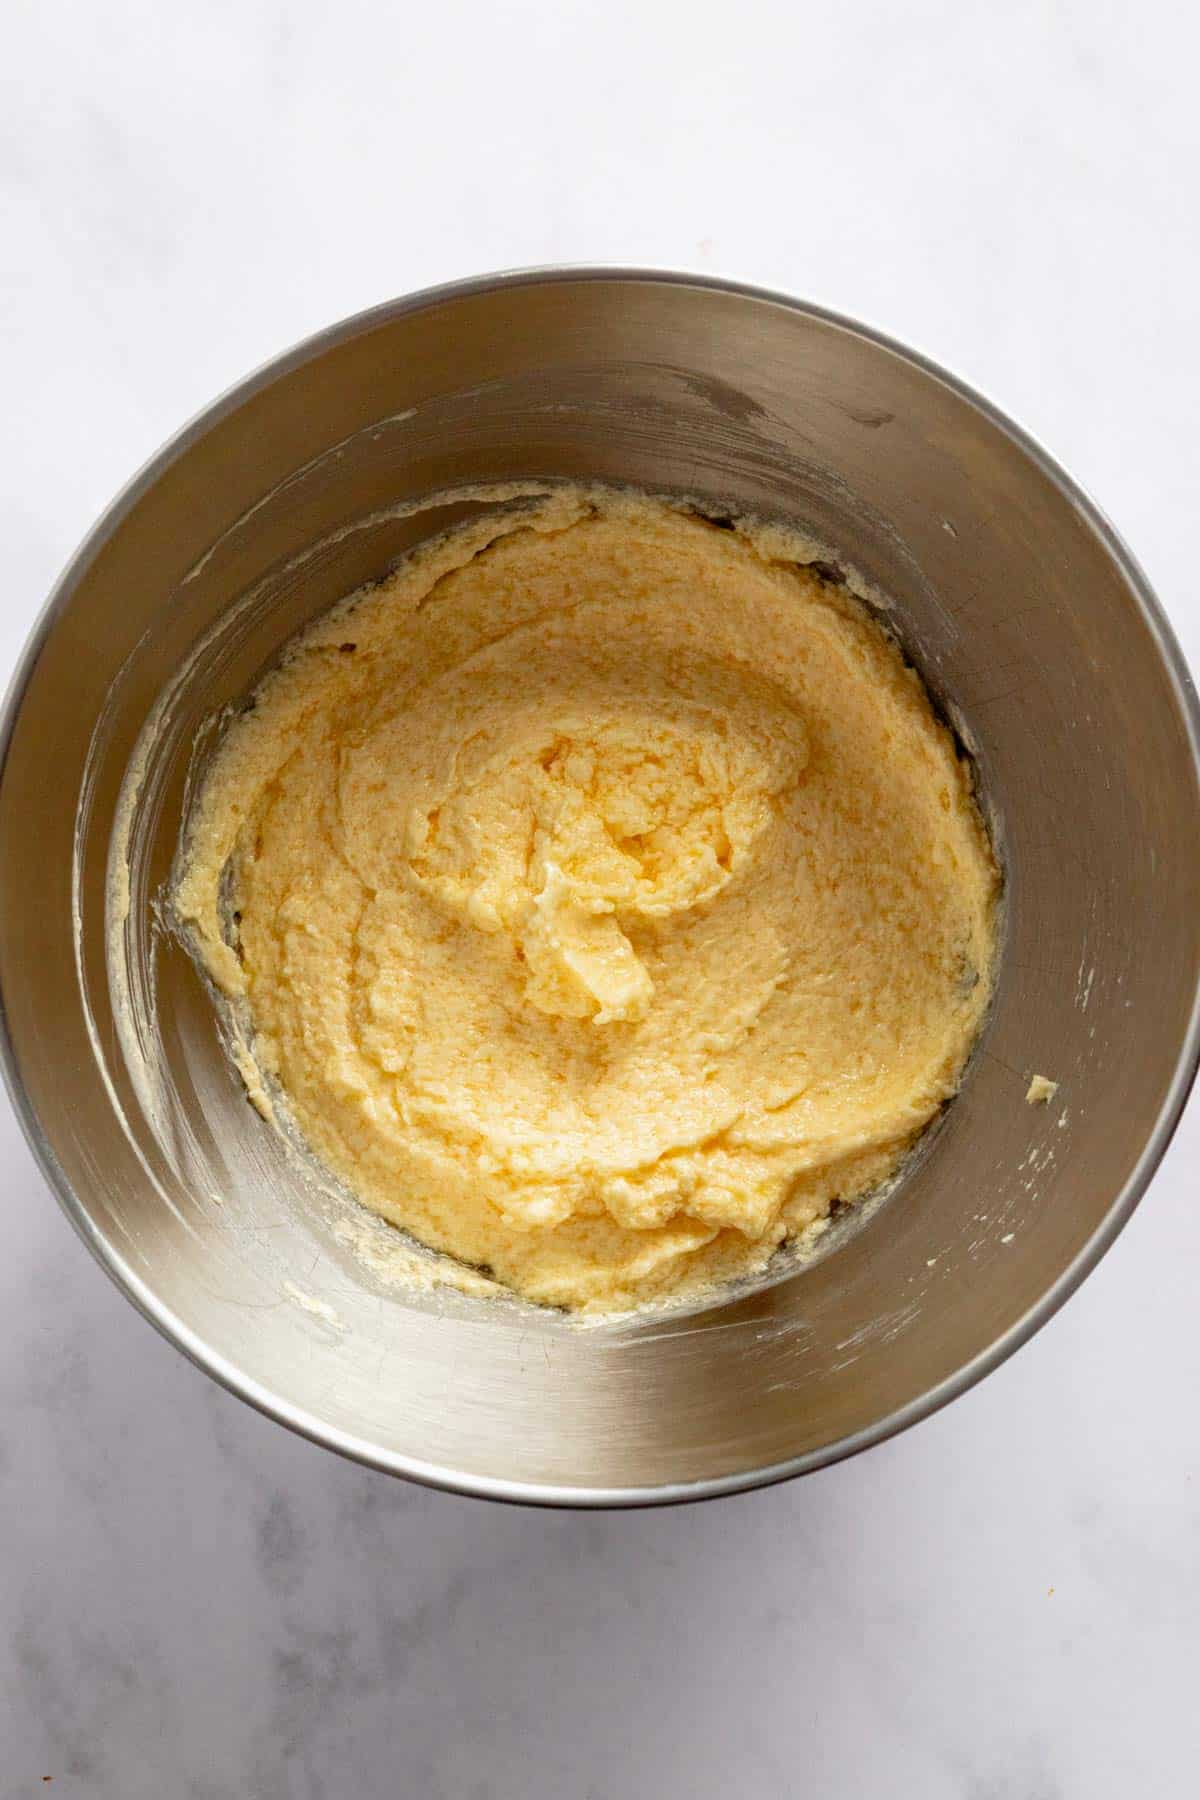 butter and sugar whisked in a bowl.